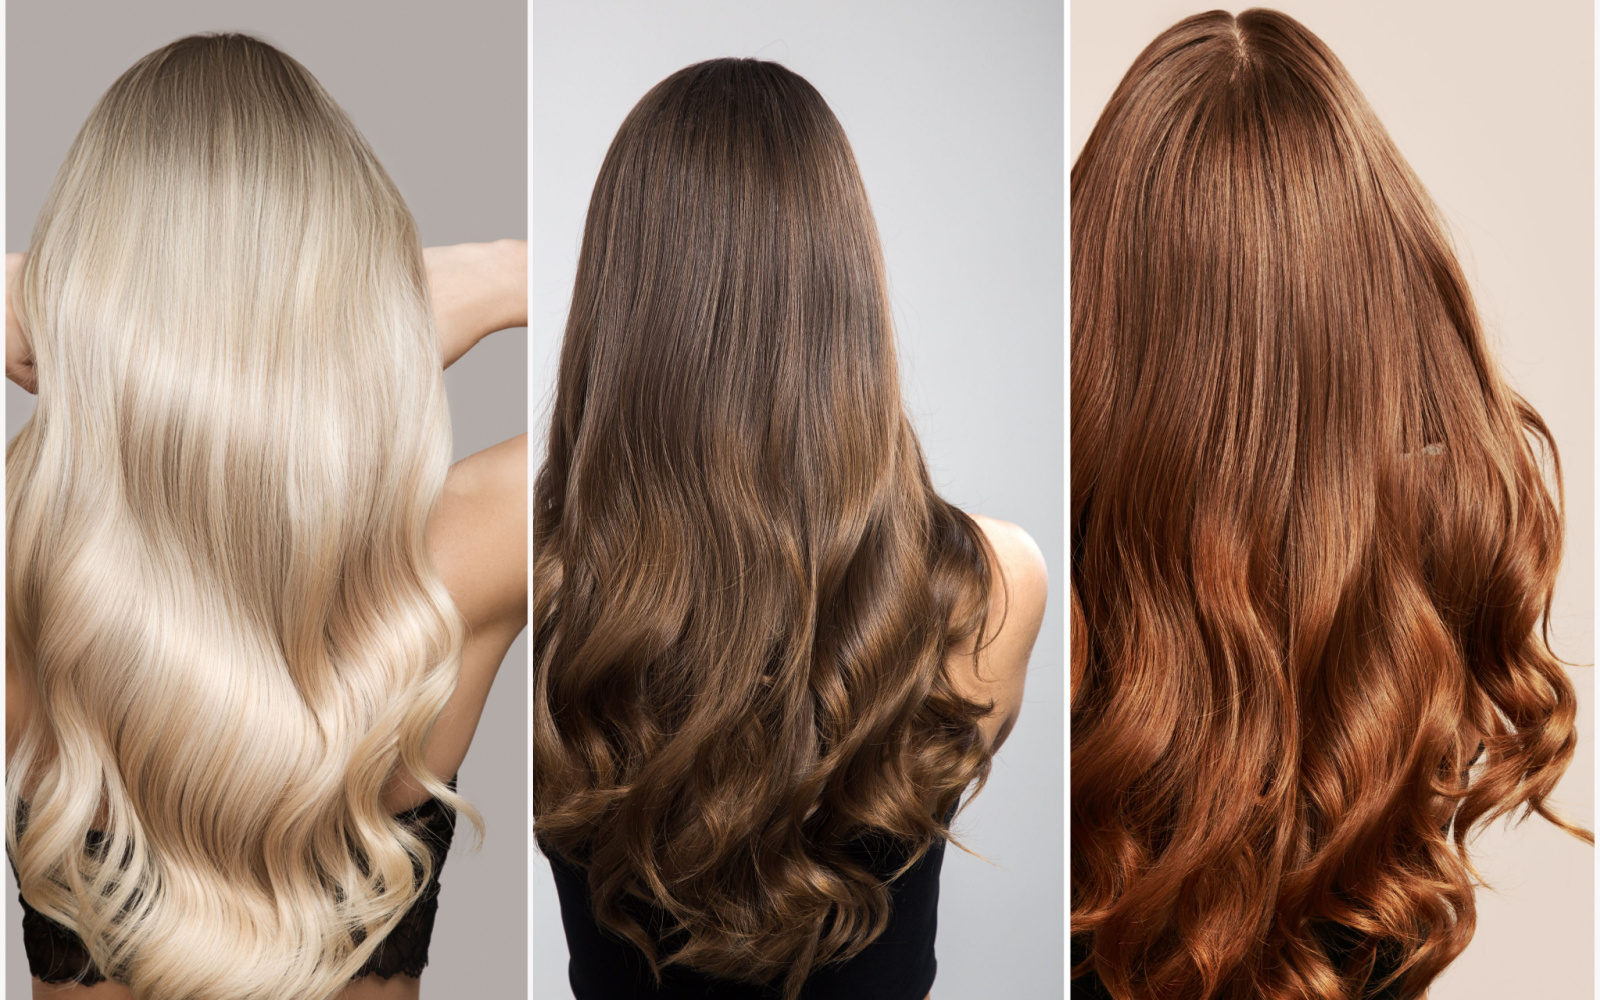 The 15 Best Hair Colors for Pale Skin in 2022